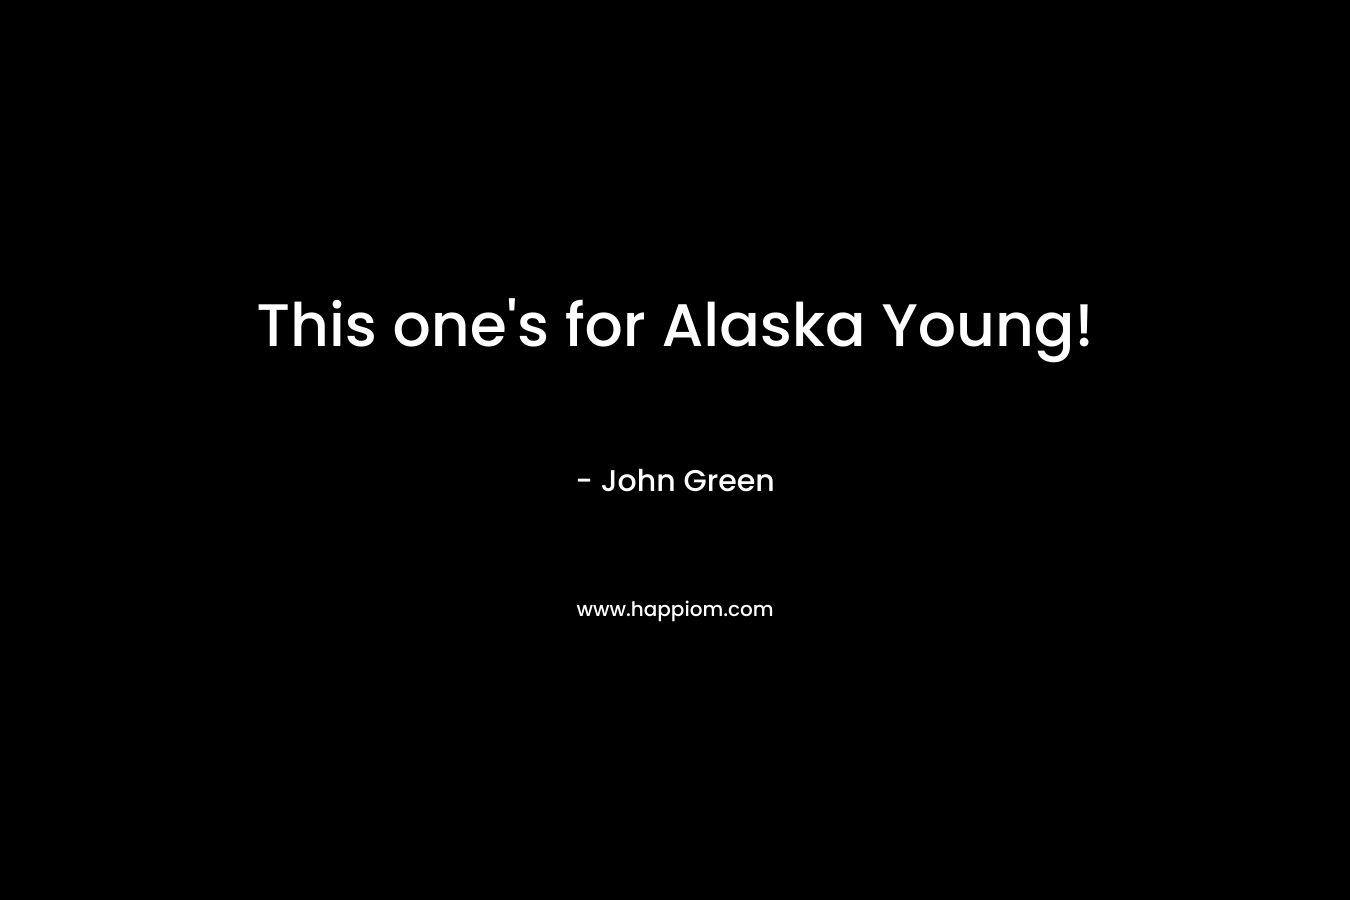 This one's for Alaska Young!